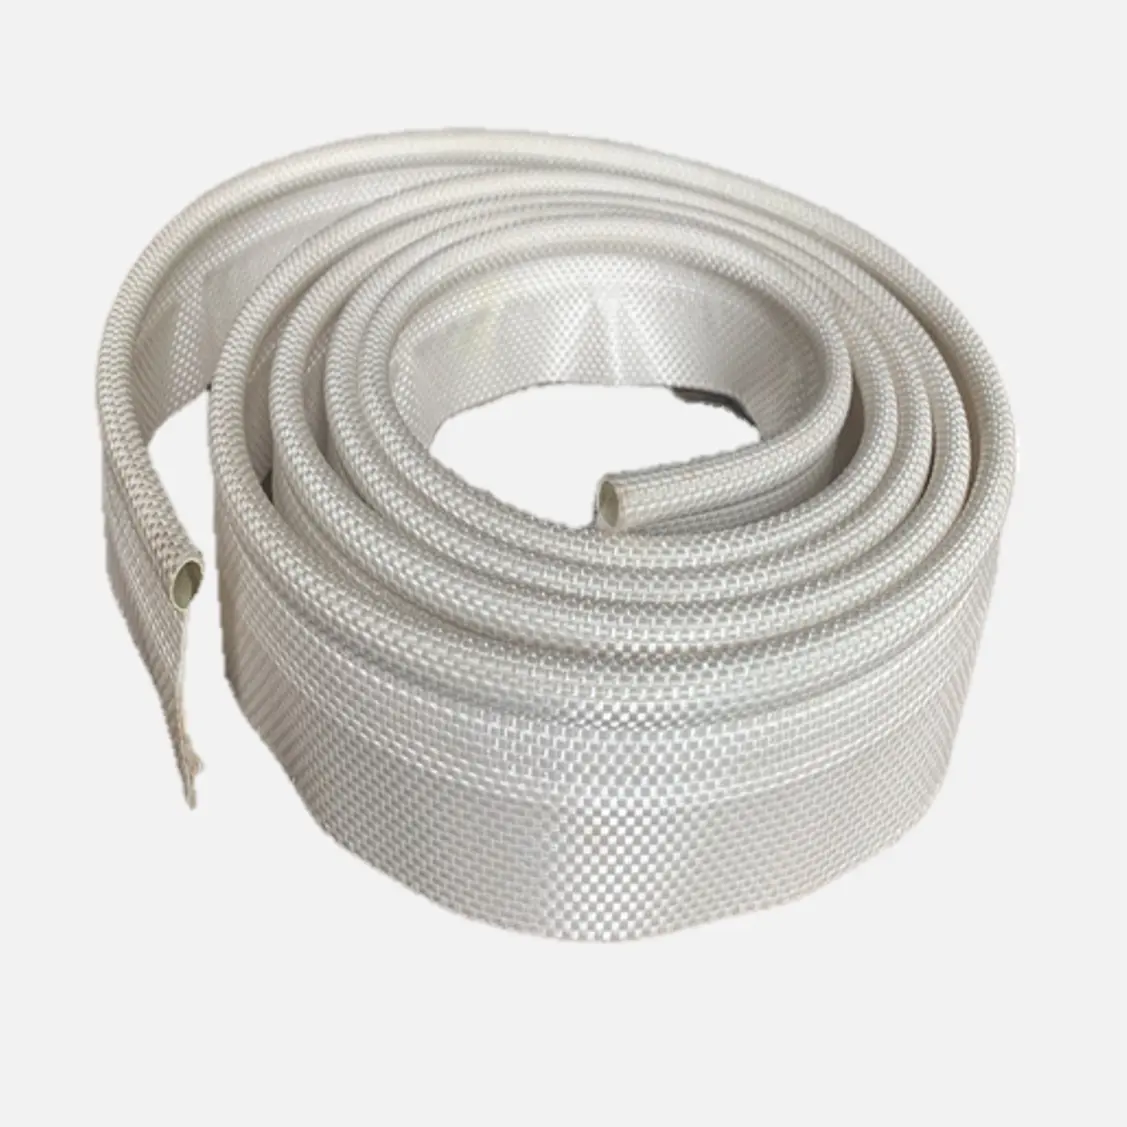 8mm Doule plap Flexible Keder is designed specifically for use in outdoor tensile structures